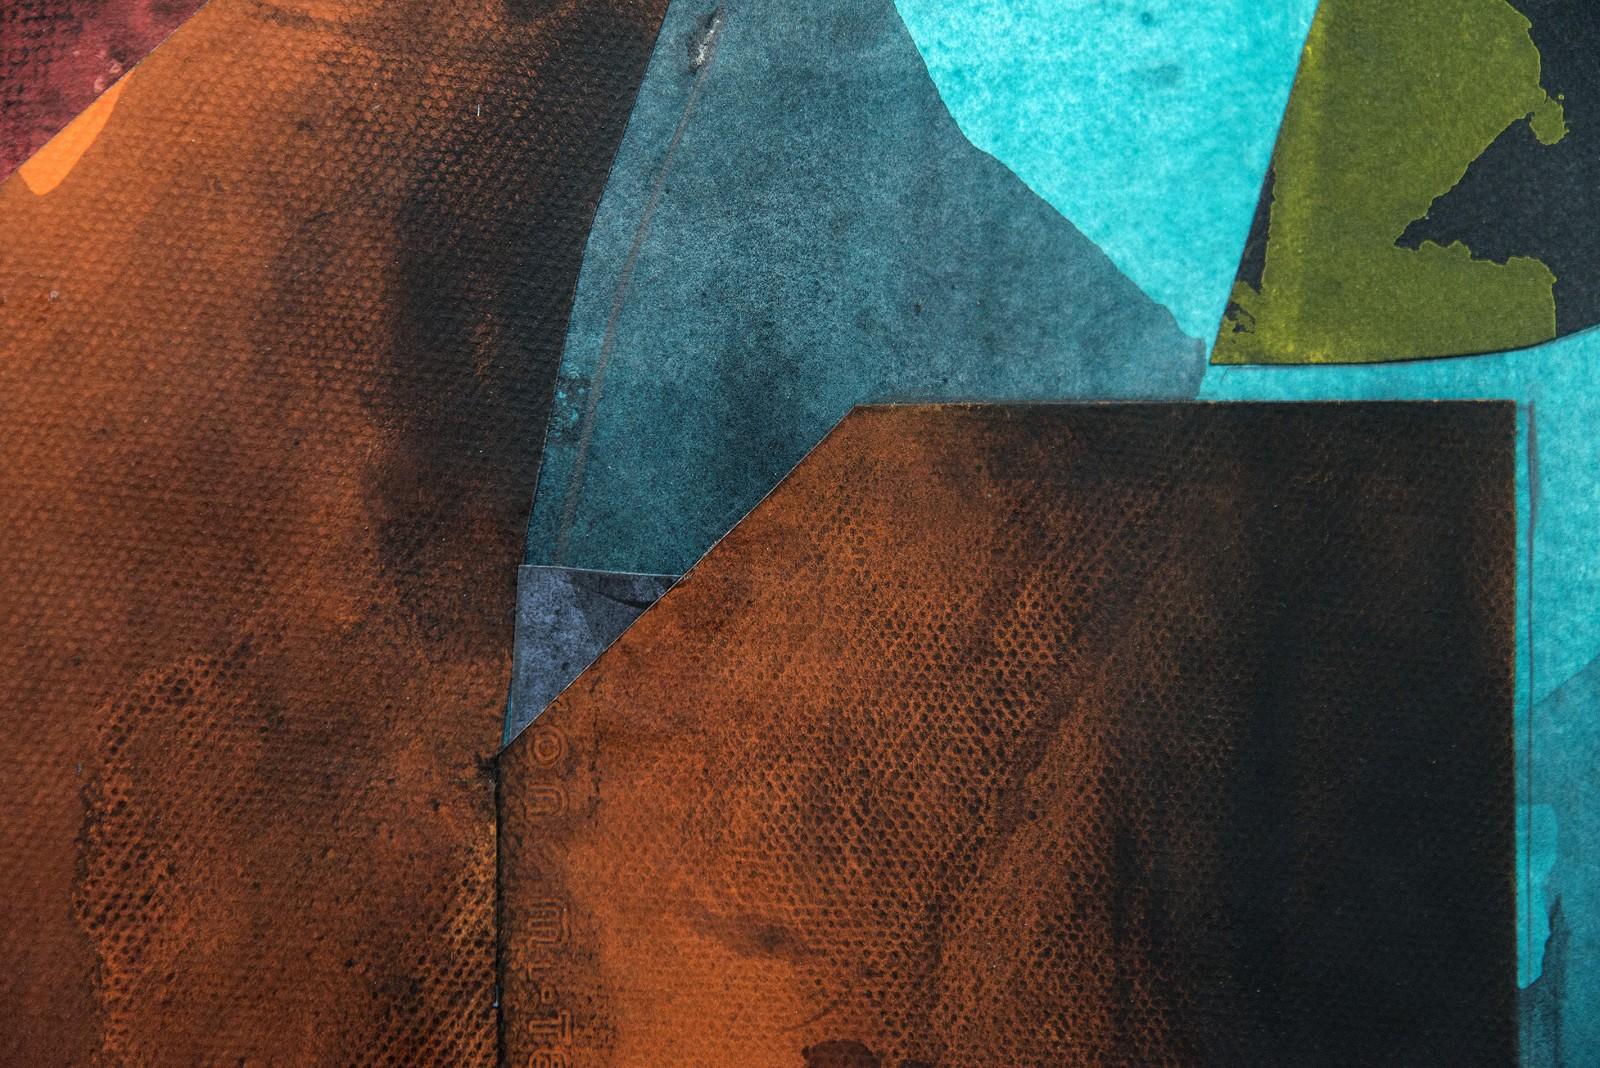 The vibrant colours—burnt orange, turquoise, black-a touch of green and the dynamic form of this inspired composition is quintessentially Otto Rogers. The modernist artist was masterful in his use of acrylic paints and his work reflected the natural